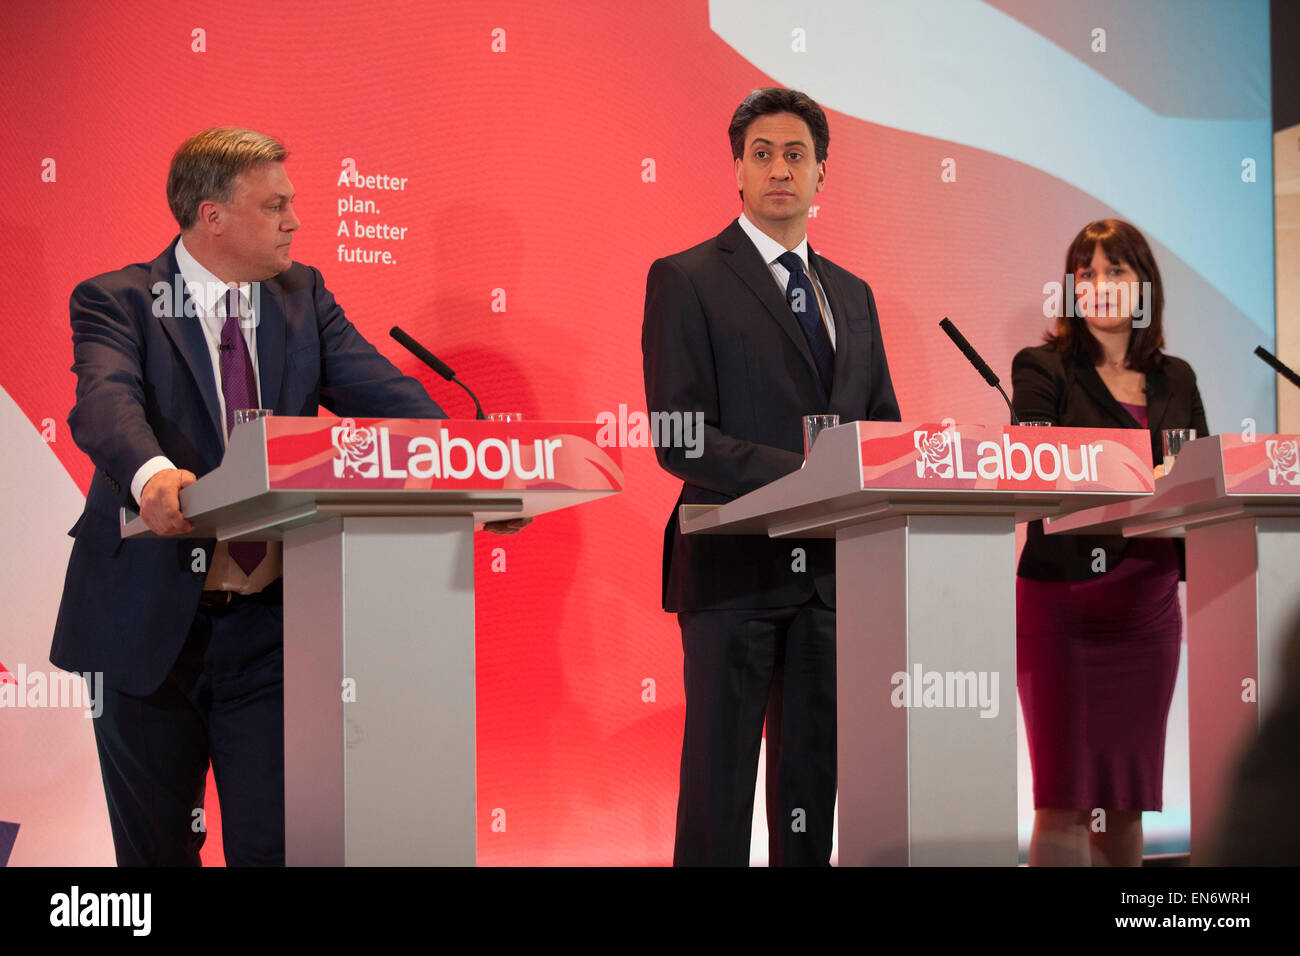 London, UK. Wednesday 29th April 2015. Labour Party Leader Ed Miliband, Shadow Chancellor Ed Balls, and Shadow Secretary of State for Work and Pensions Rachel Reeves at a General Election 2015 campaign event on the Tory threat to family finances, entitled: The Tories’ Secret Plan. Held at the Royal Institute of British Architects. Credit:  Michael Kemp/Alamy Live News Stock Photo